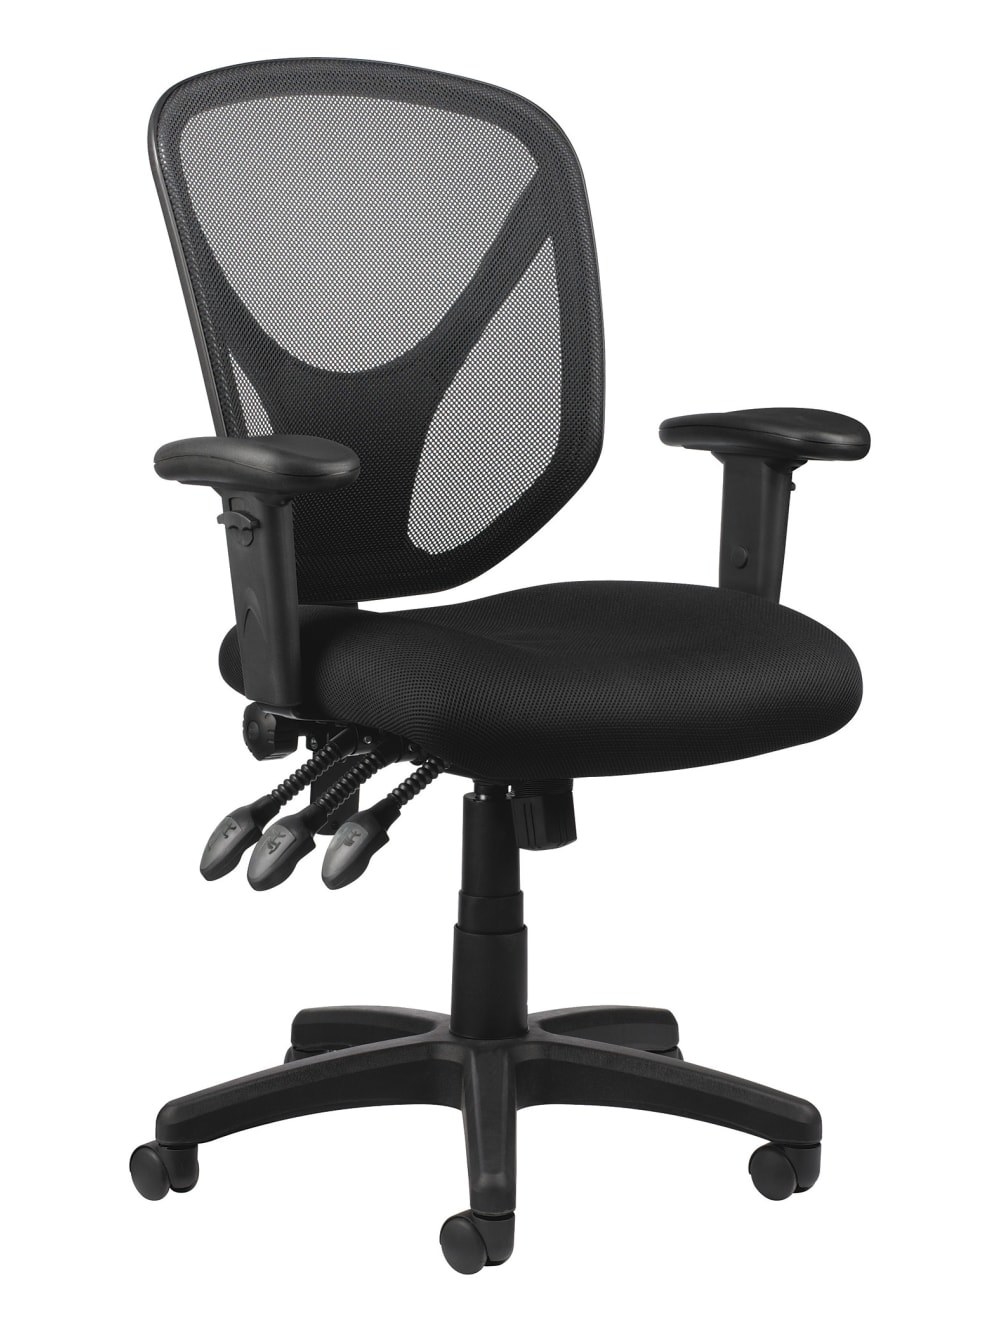 The mesh back black task chair with arm rests 